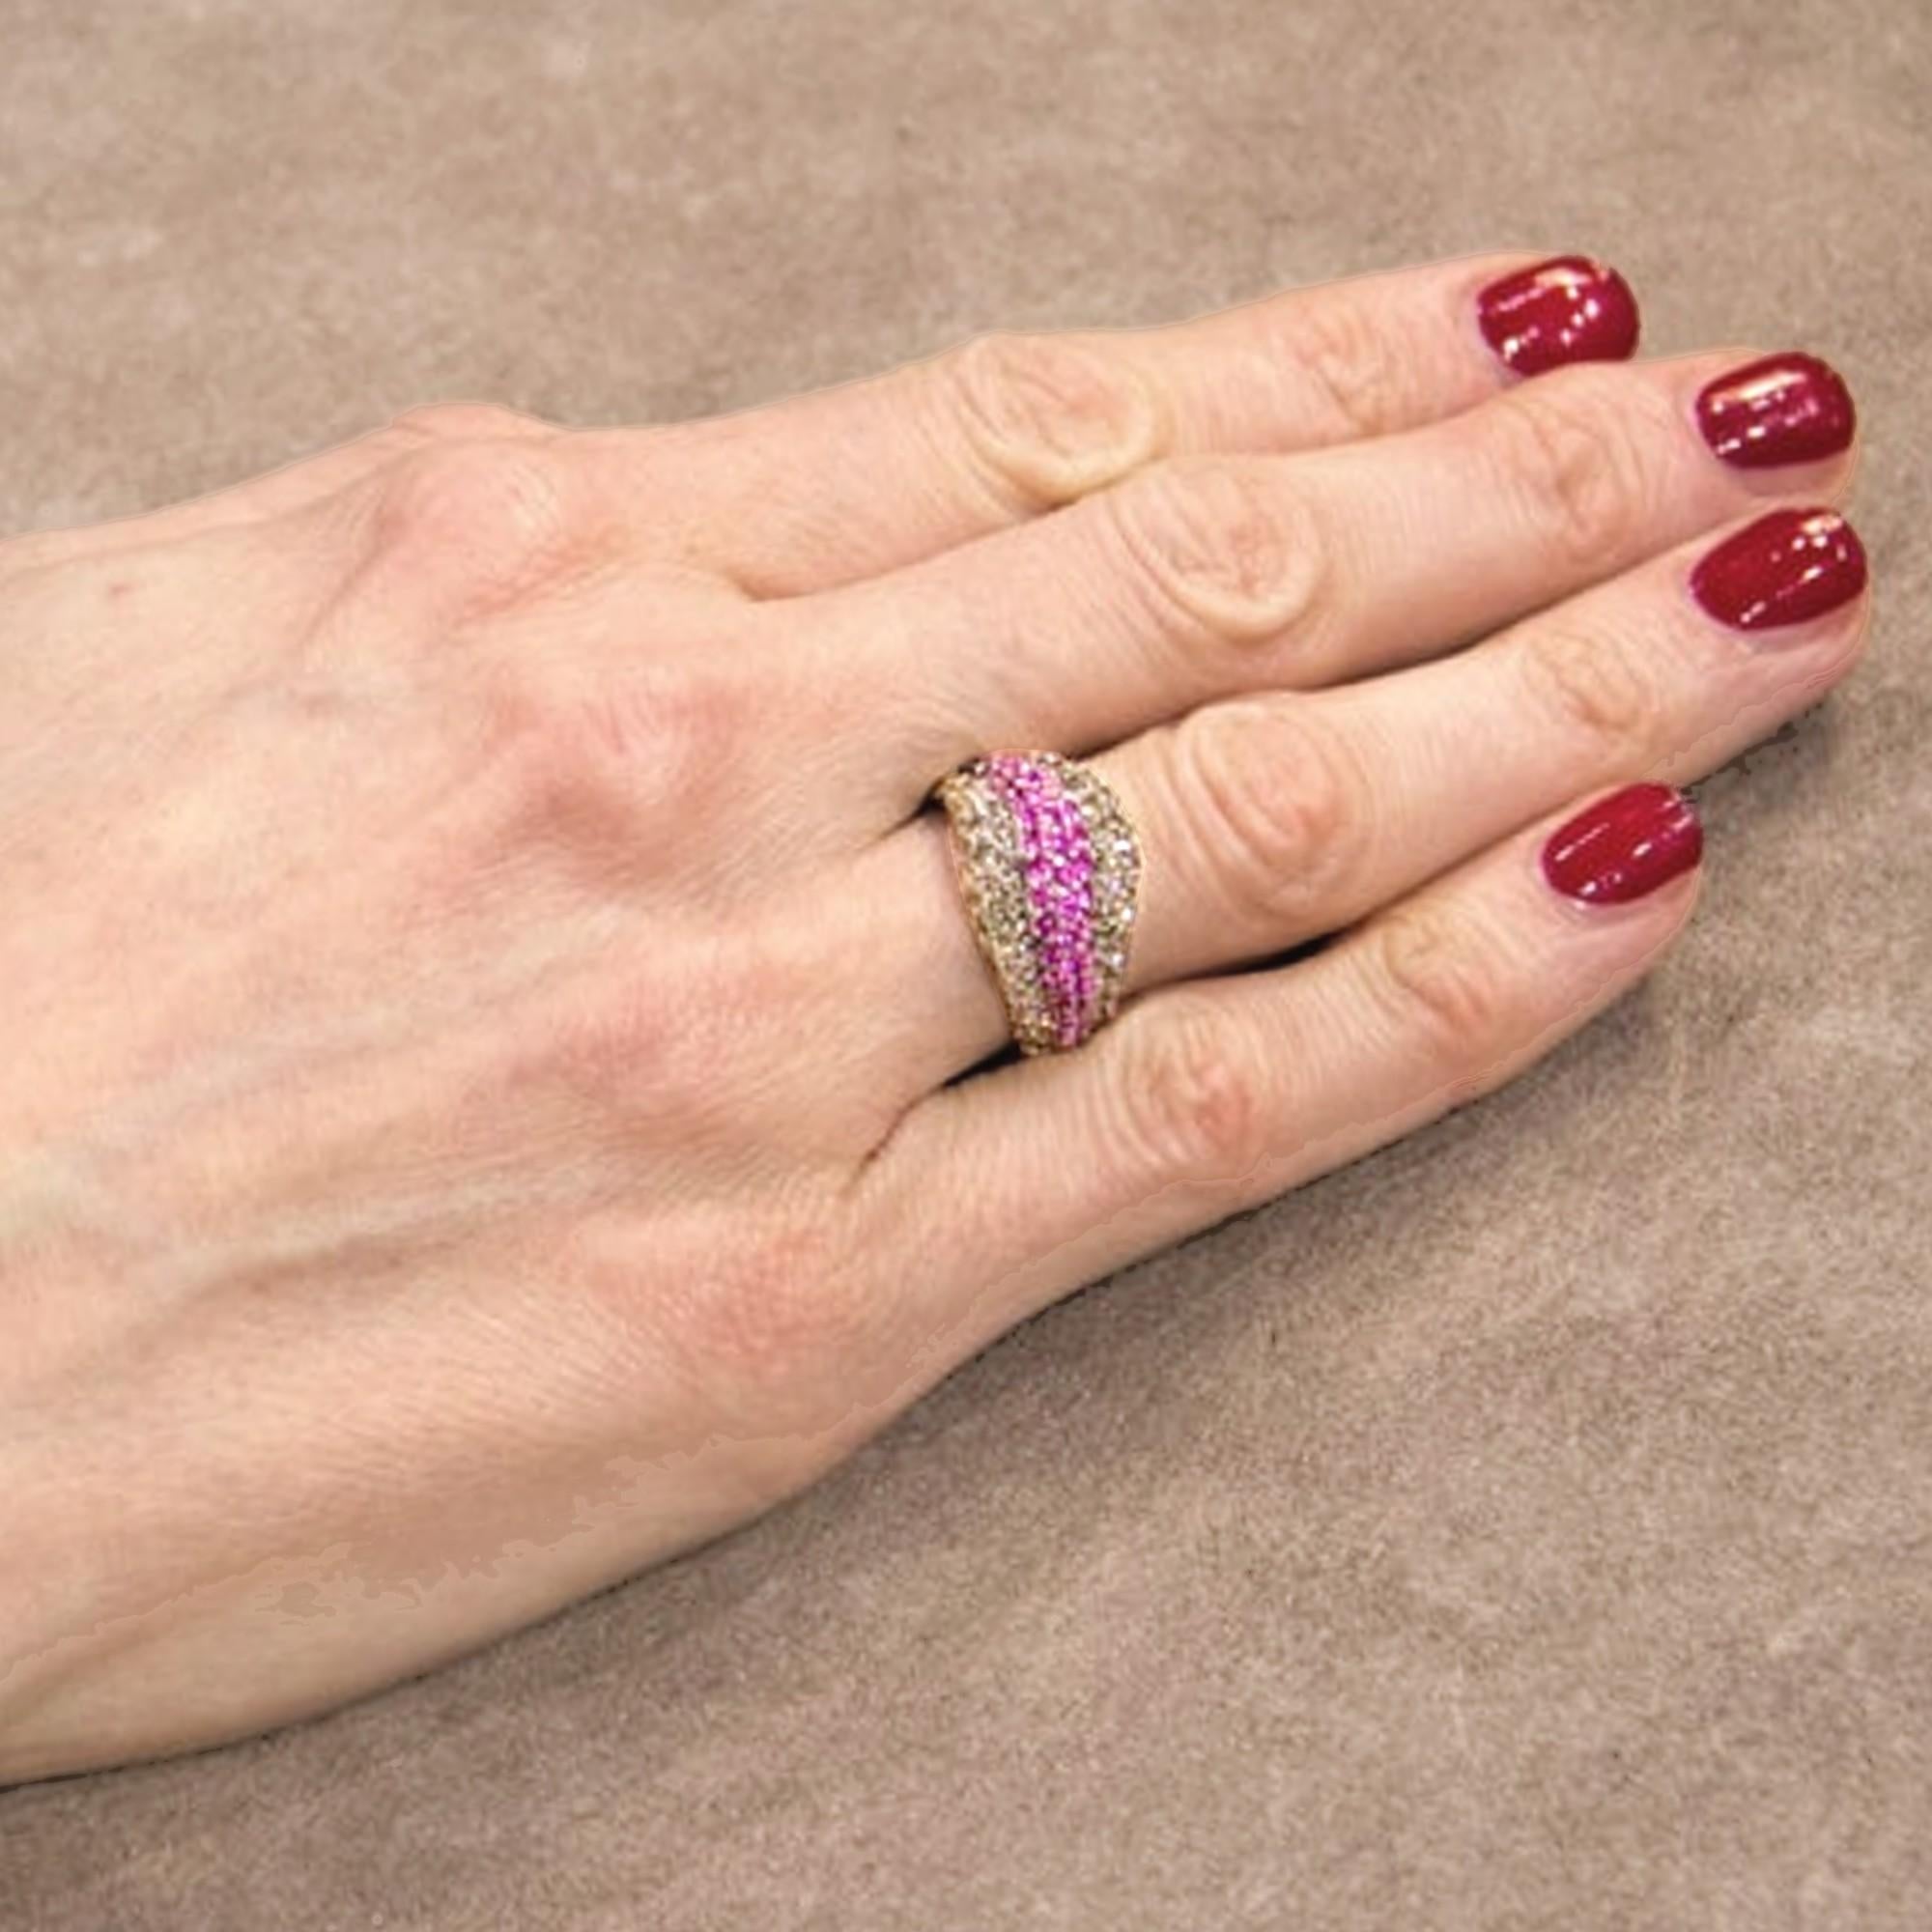 Alex Jona design collection, cognac diamond (1,68 carats) and pink sapphire pavé (1,40 carats) ring mounted in 18 karat white gold. US size 6,5 (can be sized).

Alex Jona jewels stand out, not only for their special design and for the excellent